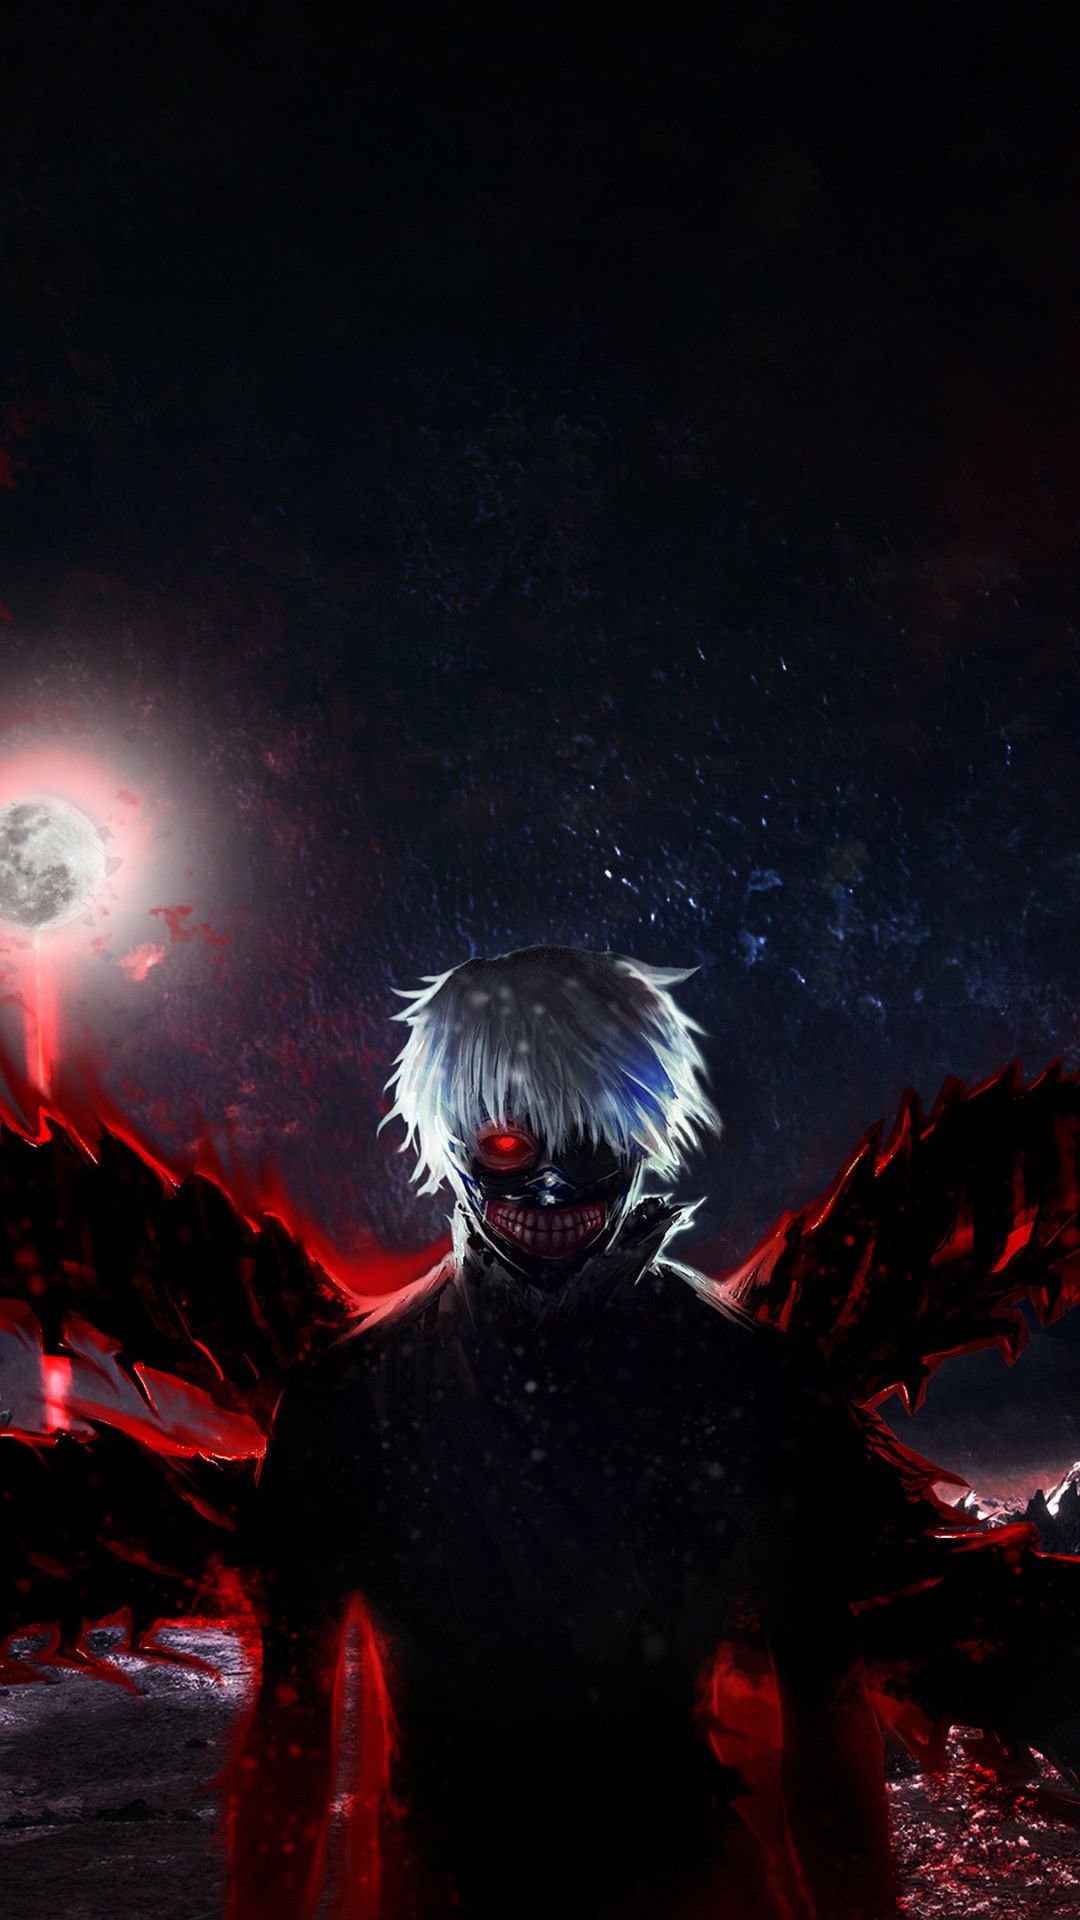 Tokyo Ghoul 4k Mobile Wallpaper iPhone Android Samsung Pixel